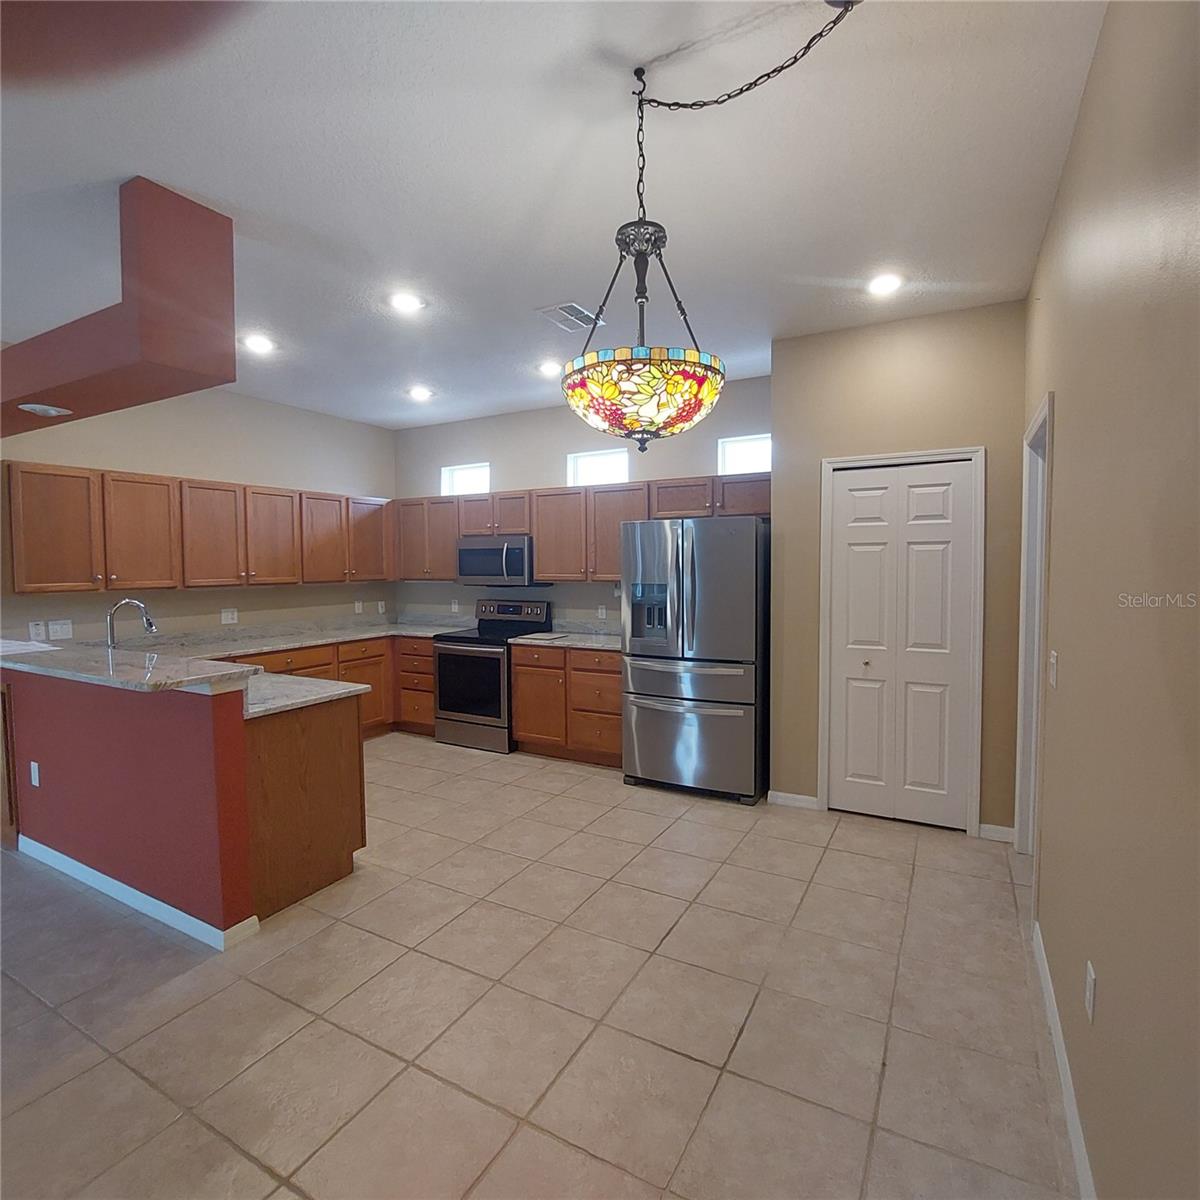 all stainless appliances, recessed lighting, newer granite counter tops